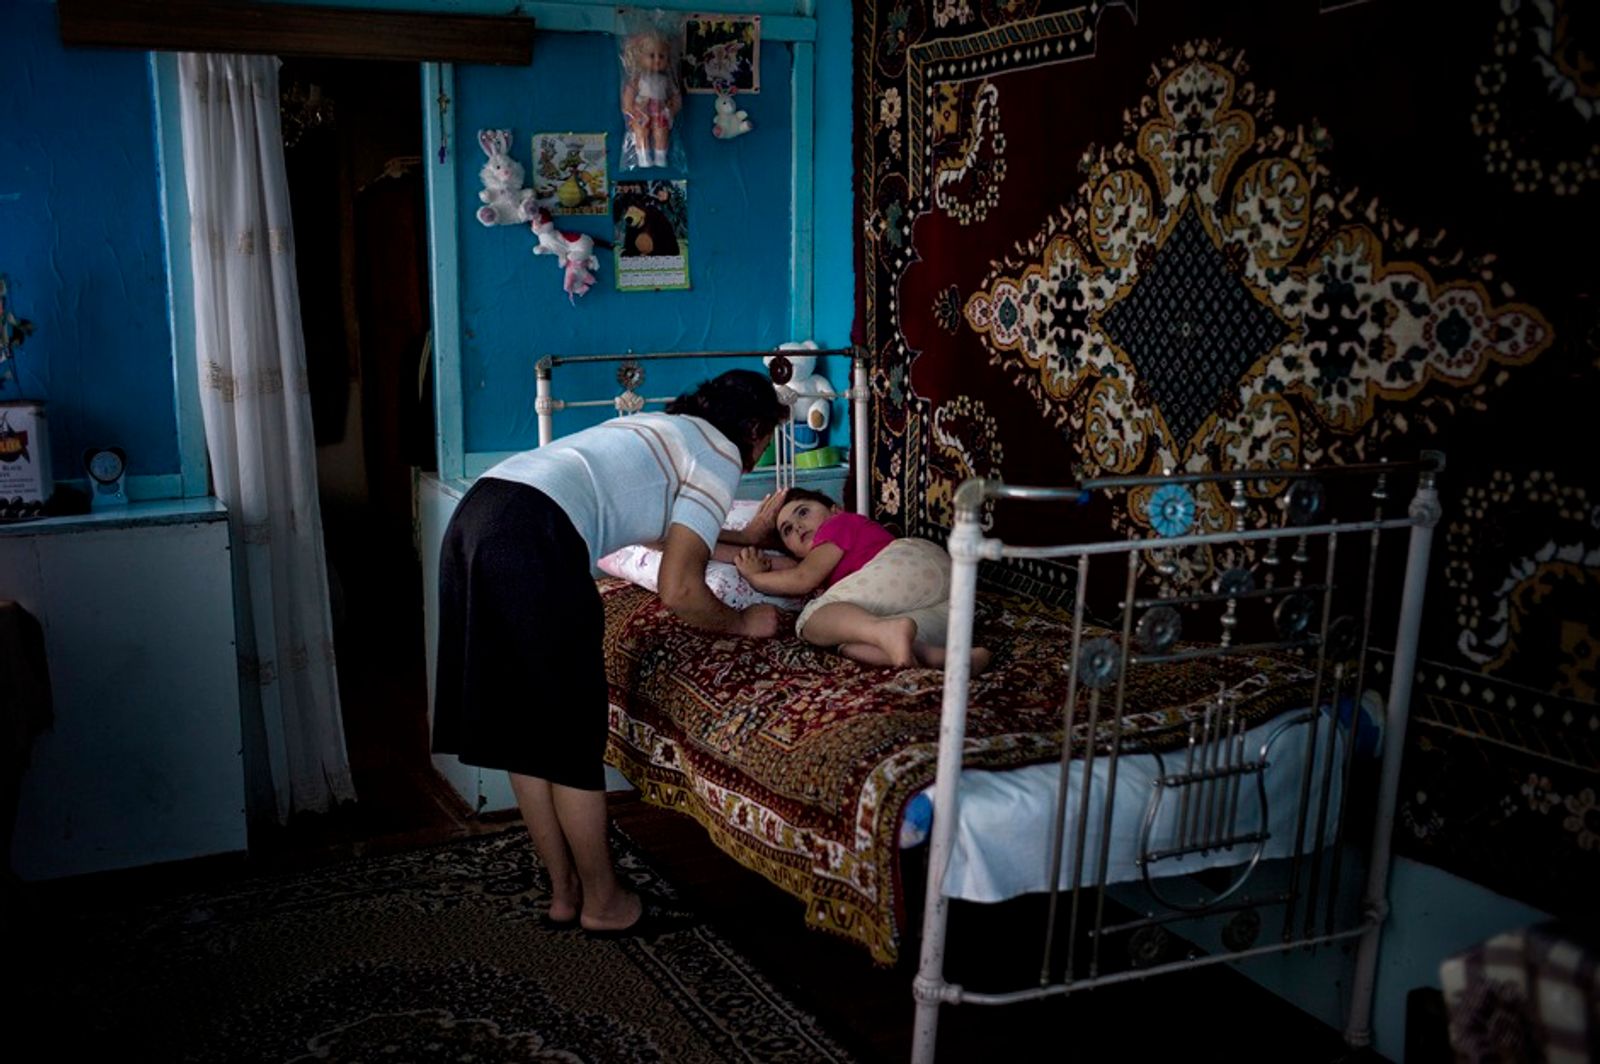 © Scout Tufankjian - Image from the The Armenian Diaspora Project photography project